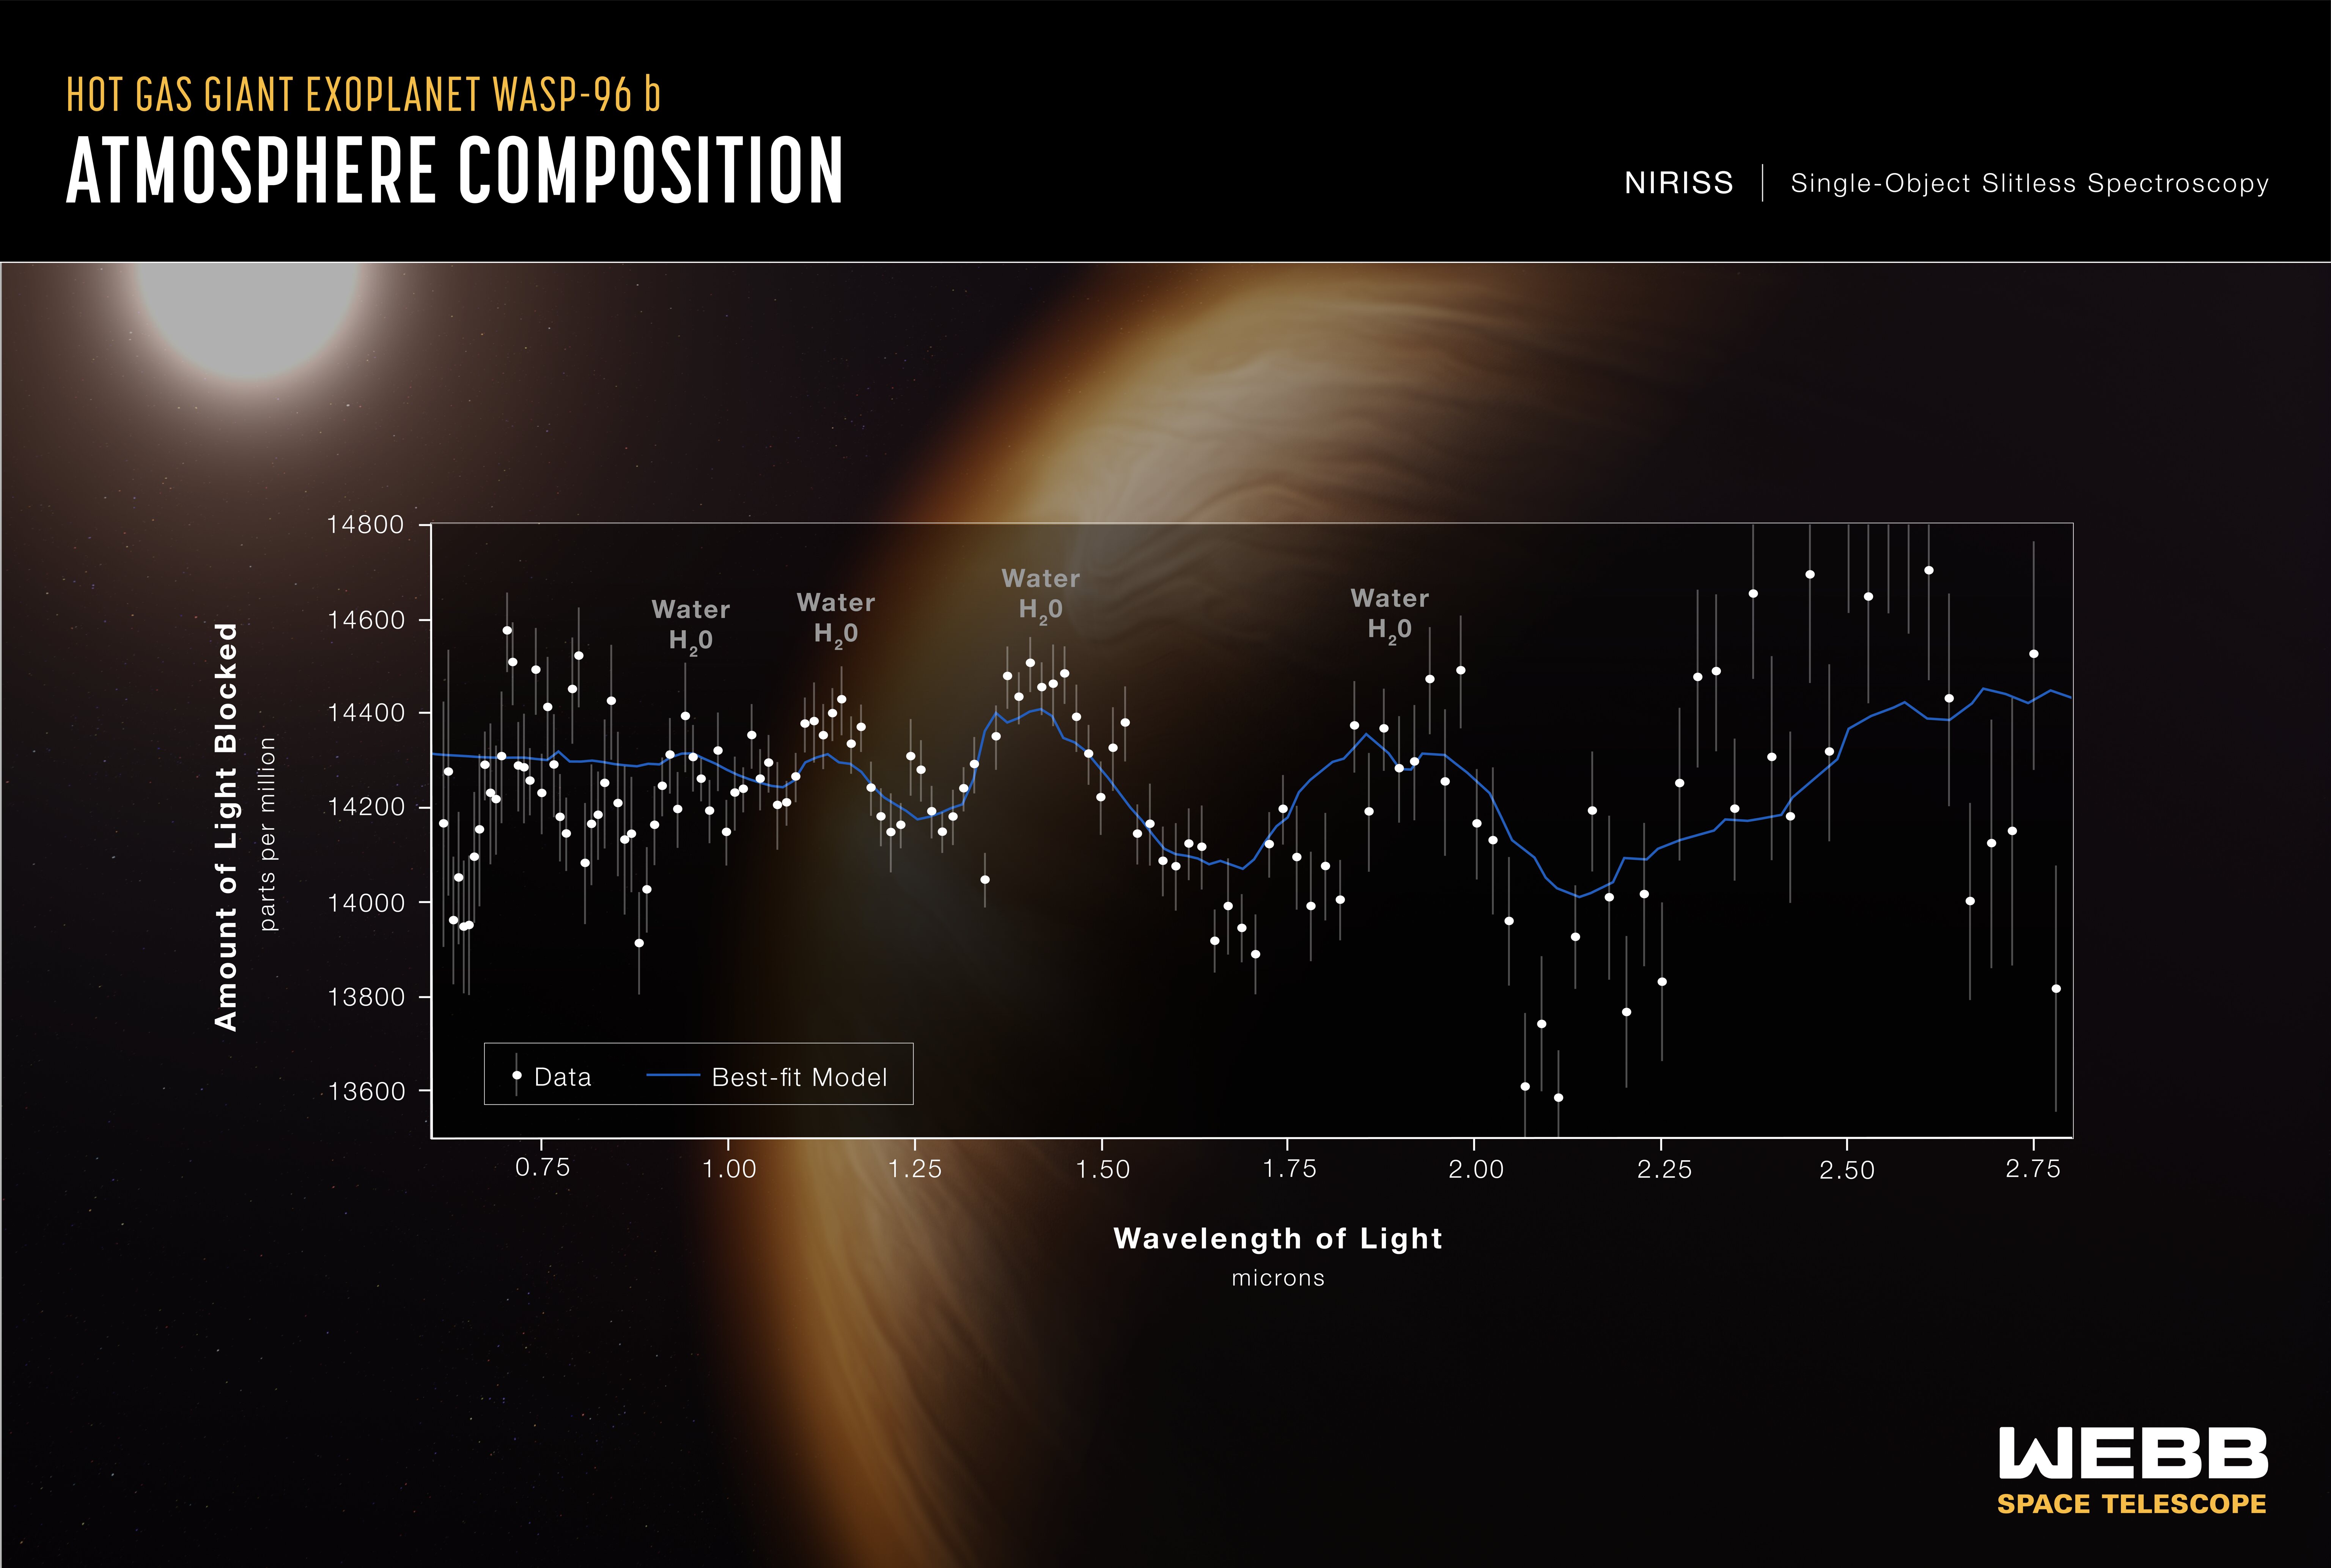 The atmosphere of WASP-96 b analyzed by the James Webb Space Telescope.